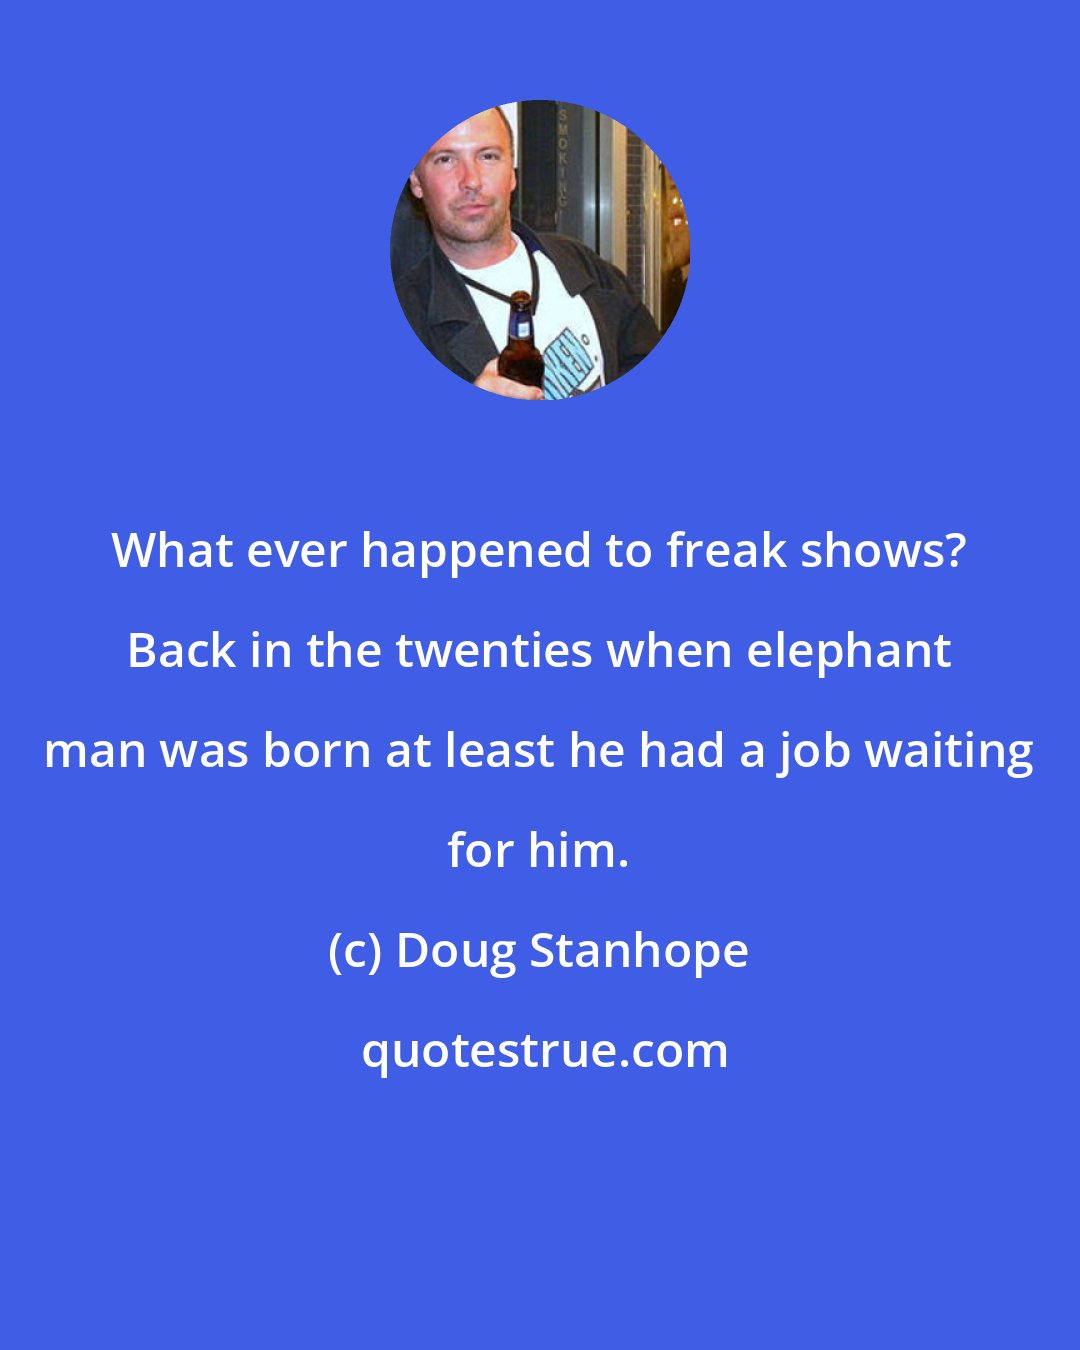 Doug Stanhope: What ever happened to freak shows? Back in the twenties when elephant man was born at least he had a job waiting for him.